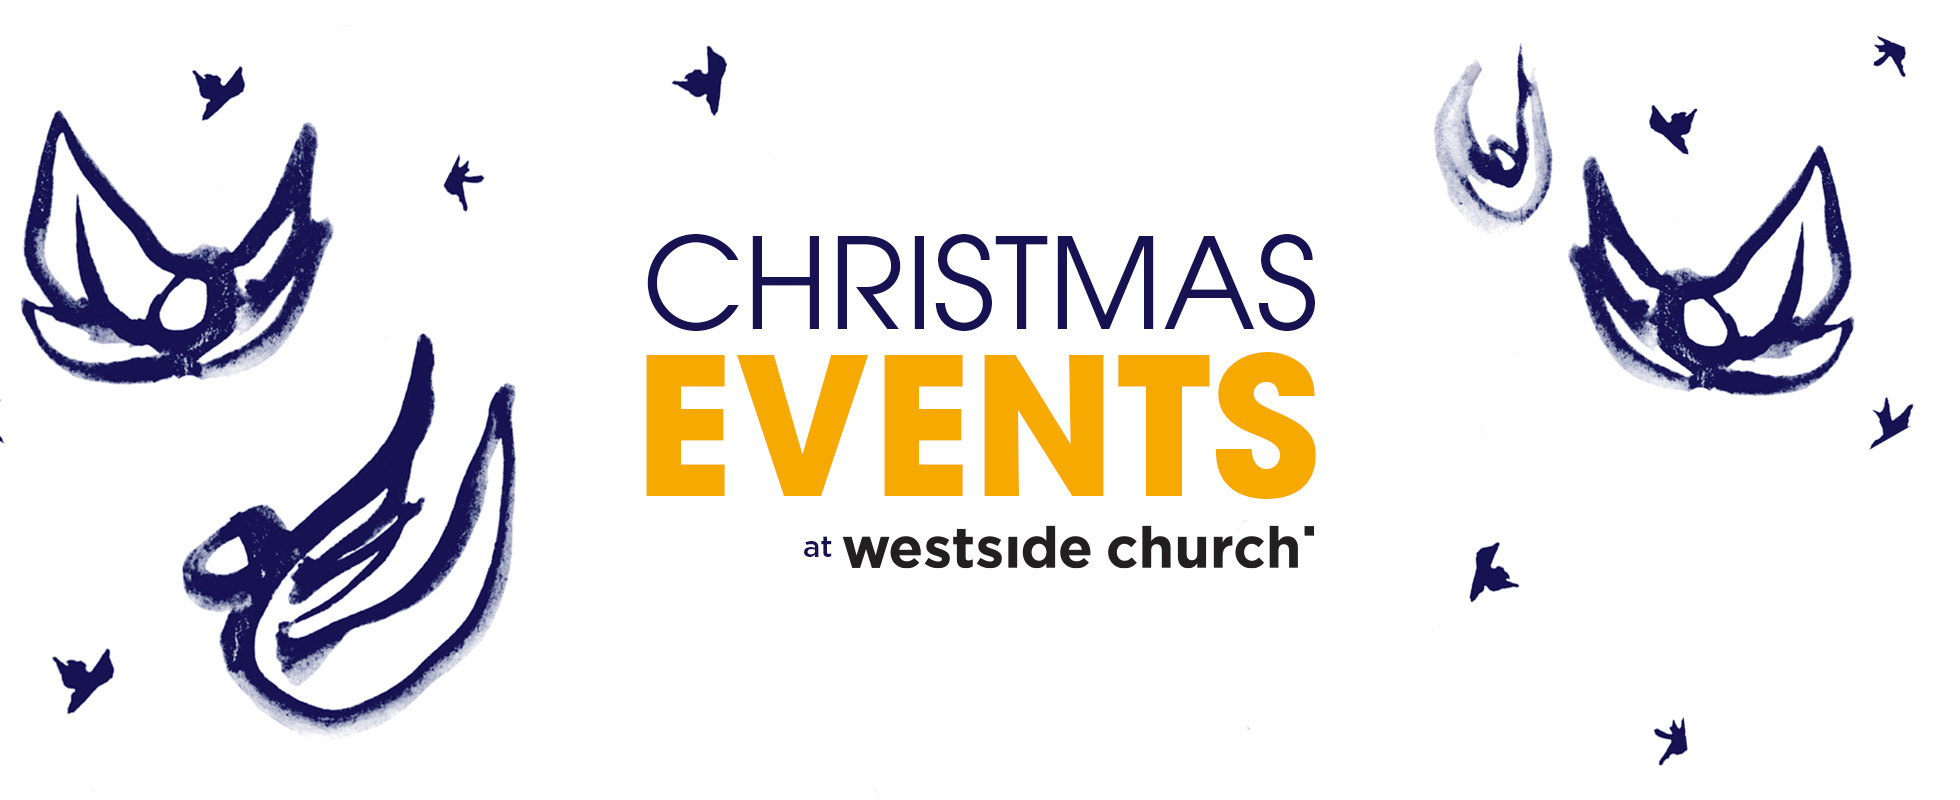 White background with blue angels and stars that says Christmas Events